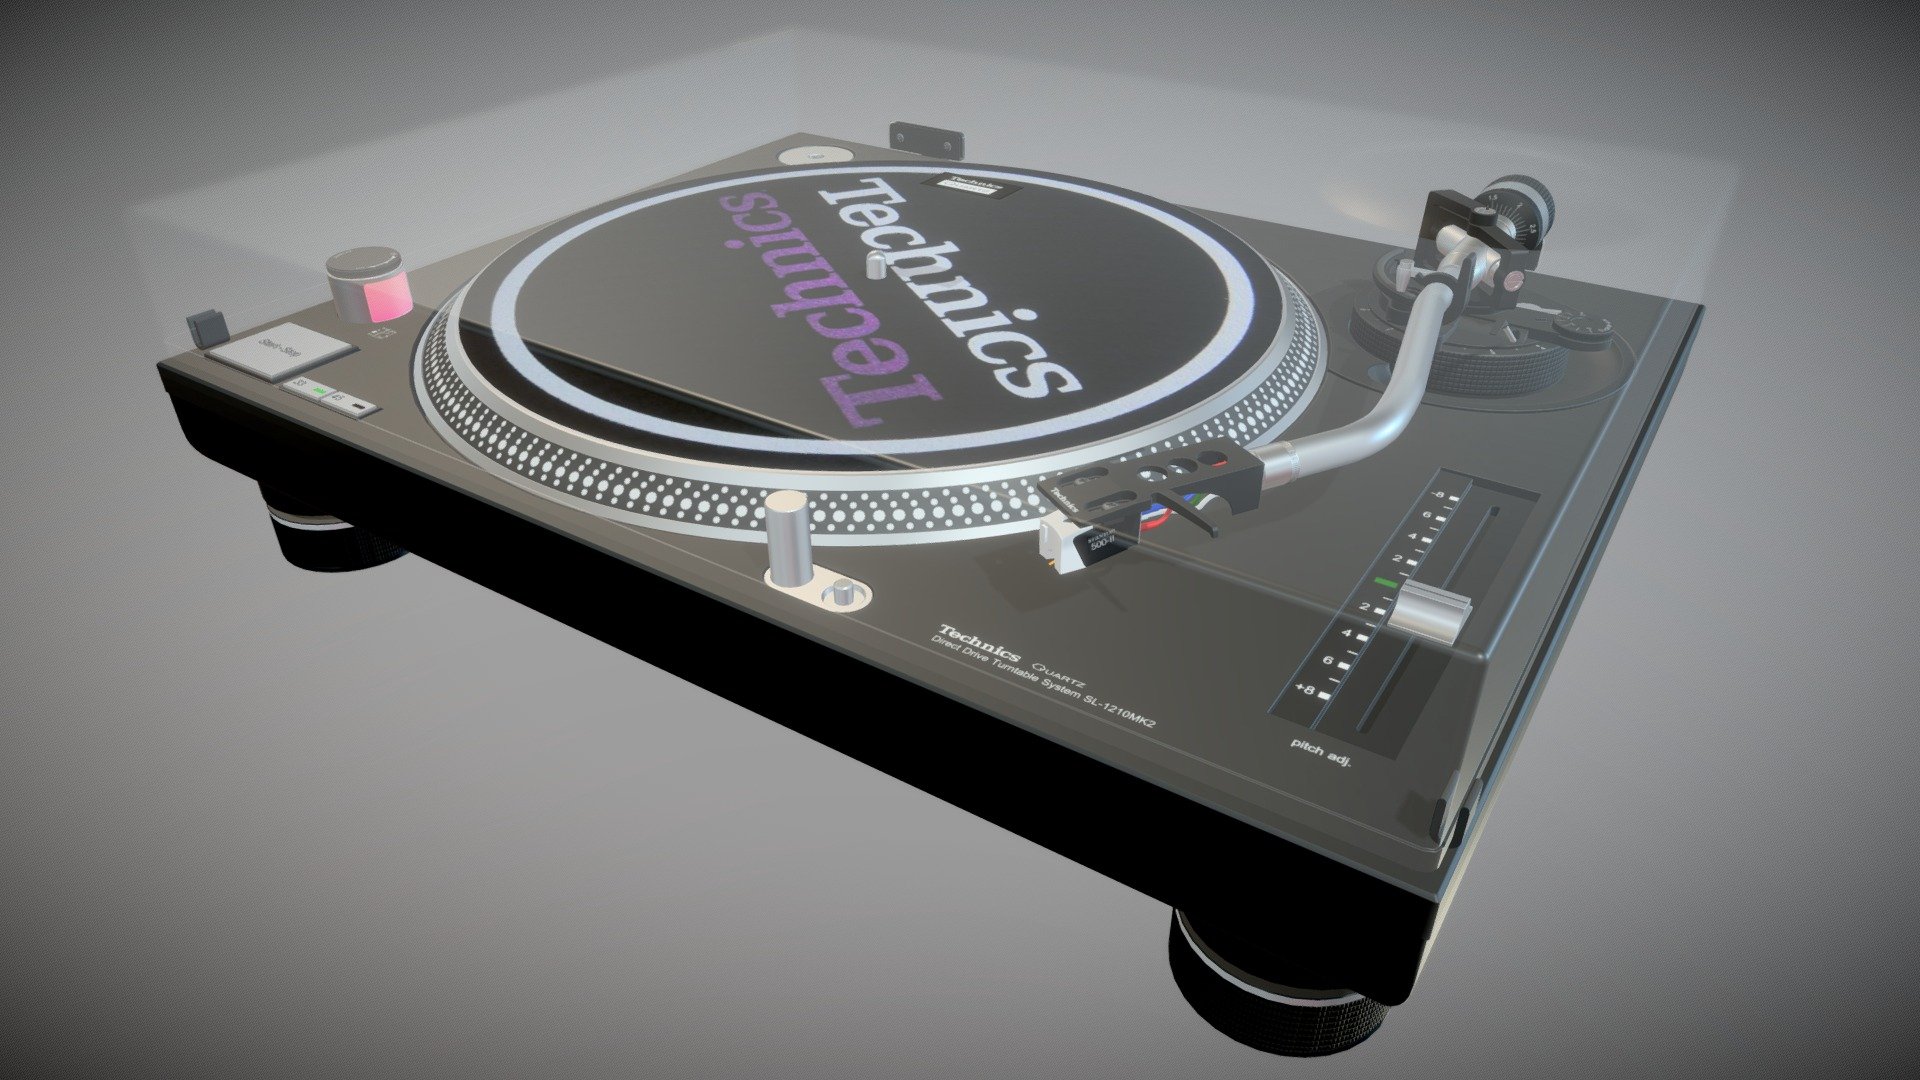 The classic Technics turntable. I tried to model this as accurately as possible so also modeled most of the underside of the turntable.

Fully unwrapped and UVed.
Some UVs may need to be re-arranged if you choose to use them.

Includes zip file that contains:
Blender 2.8 file with basic shader setup.
3 x 4K PNG files ( AO, Diffuse &amp; Normal) - Technics 1210 MK2 Turntable - Buy Royalty Free 3D model by Sibience 3d model